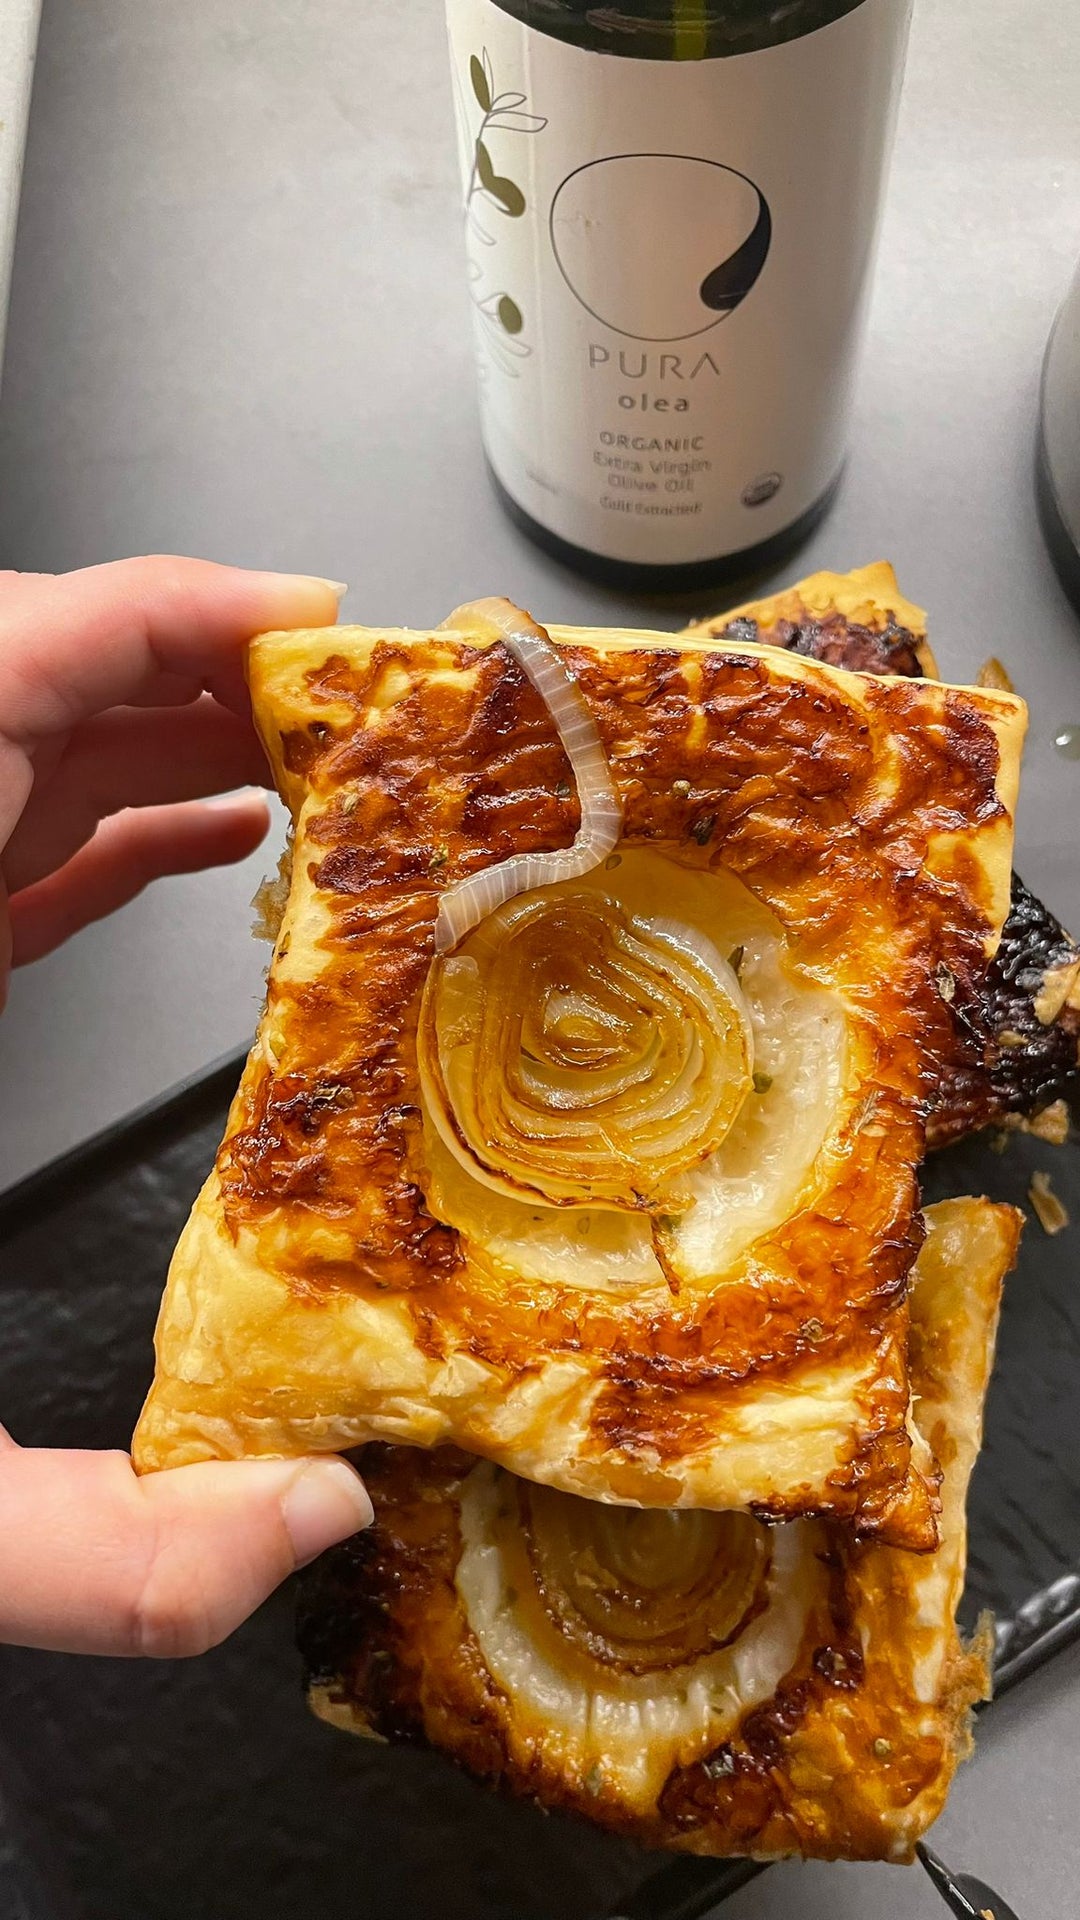 Delicious Upside Down Puff Pastry Recipe